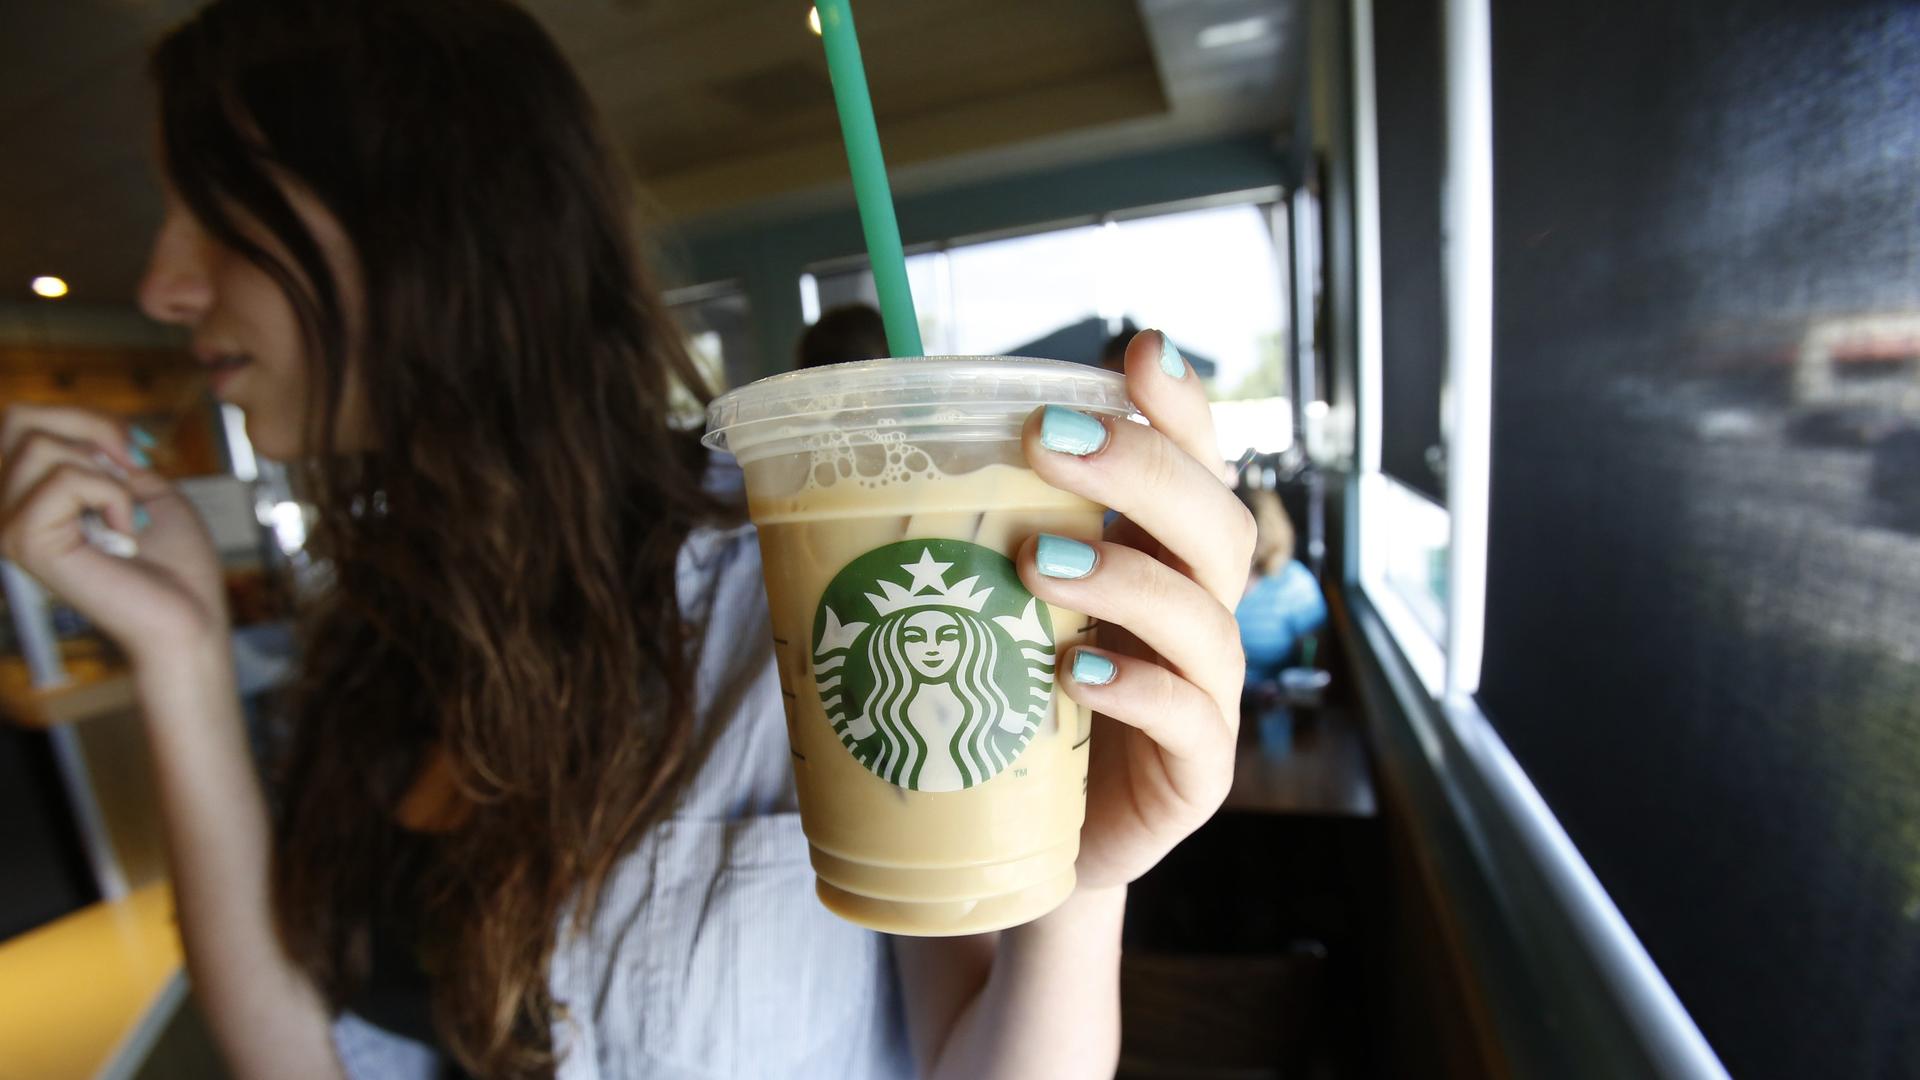 Starbucks announced plans to phase out single-use plastic straws by the year 2020. The company says it will eliminate the need for 1 billion straws annually. 